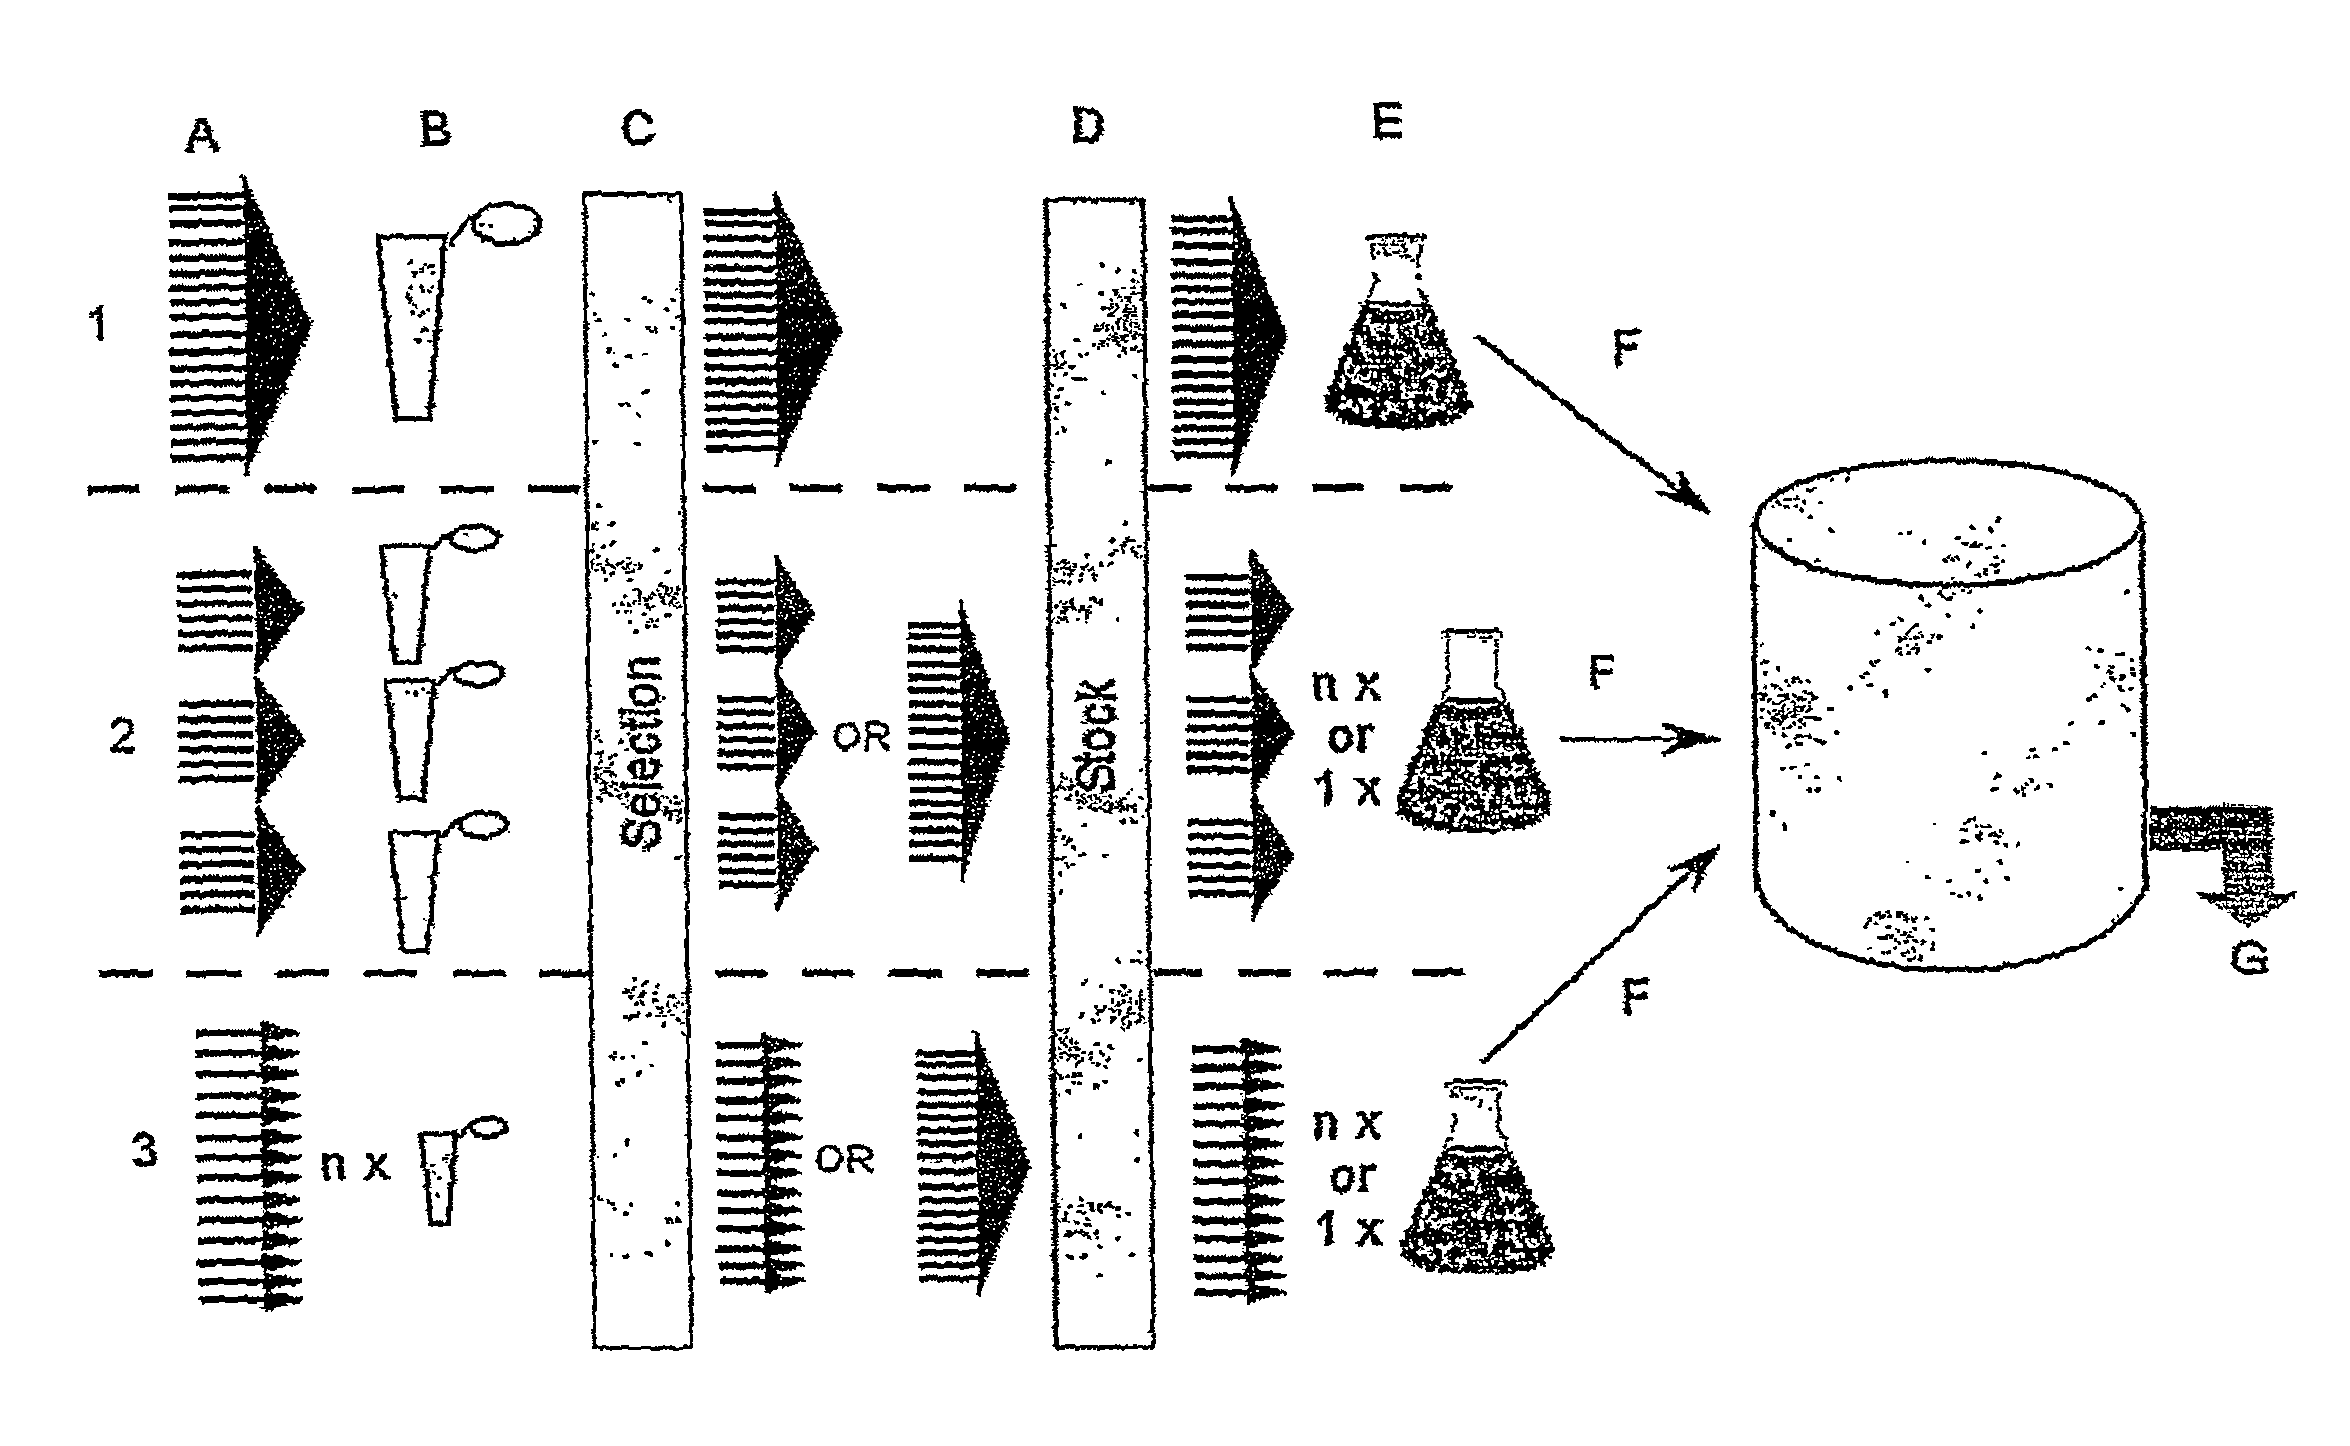 Method for manufacturing recombinant polyclonal proteins